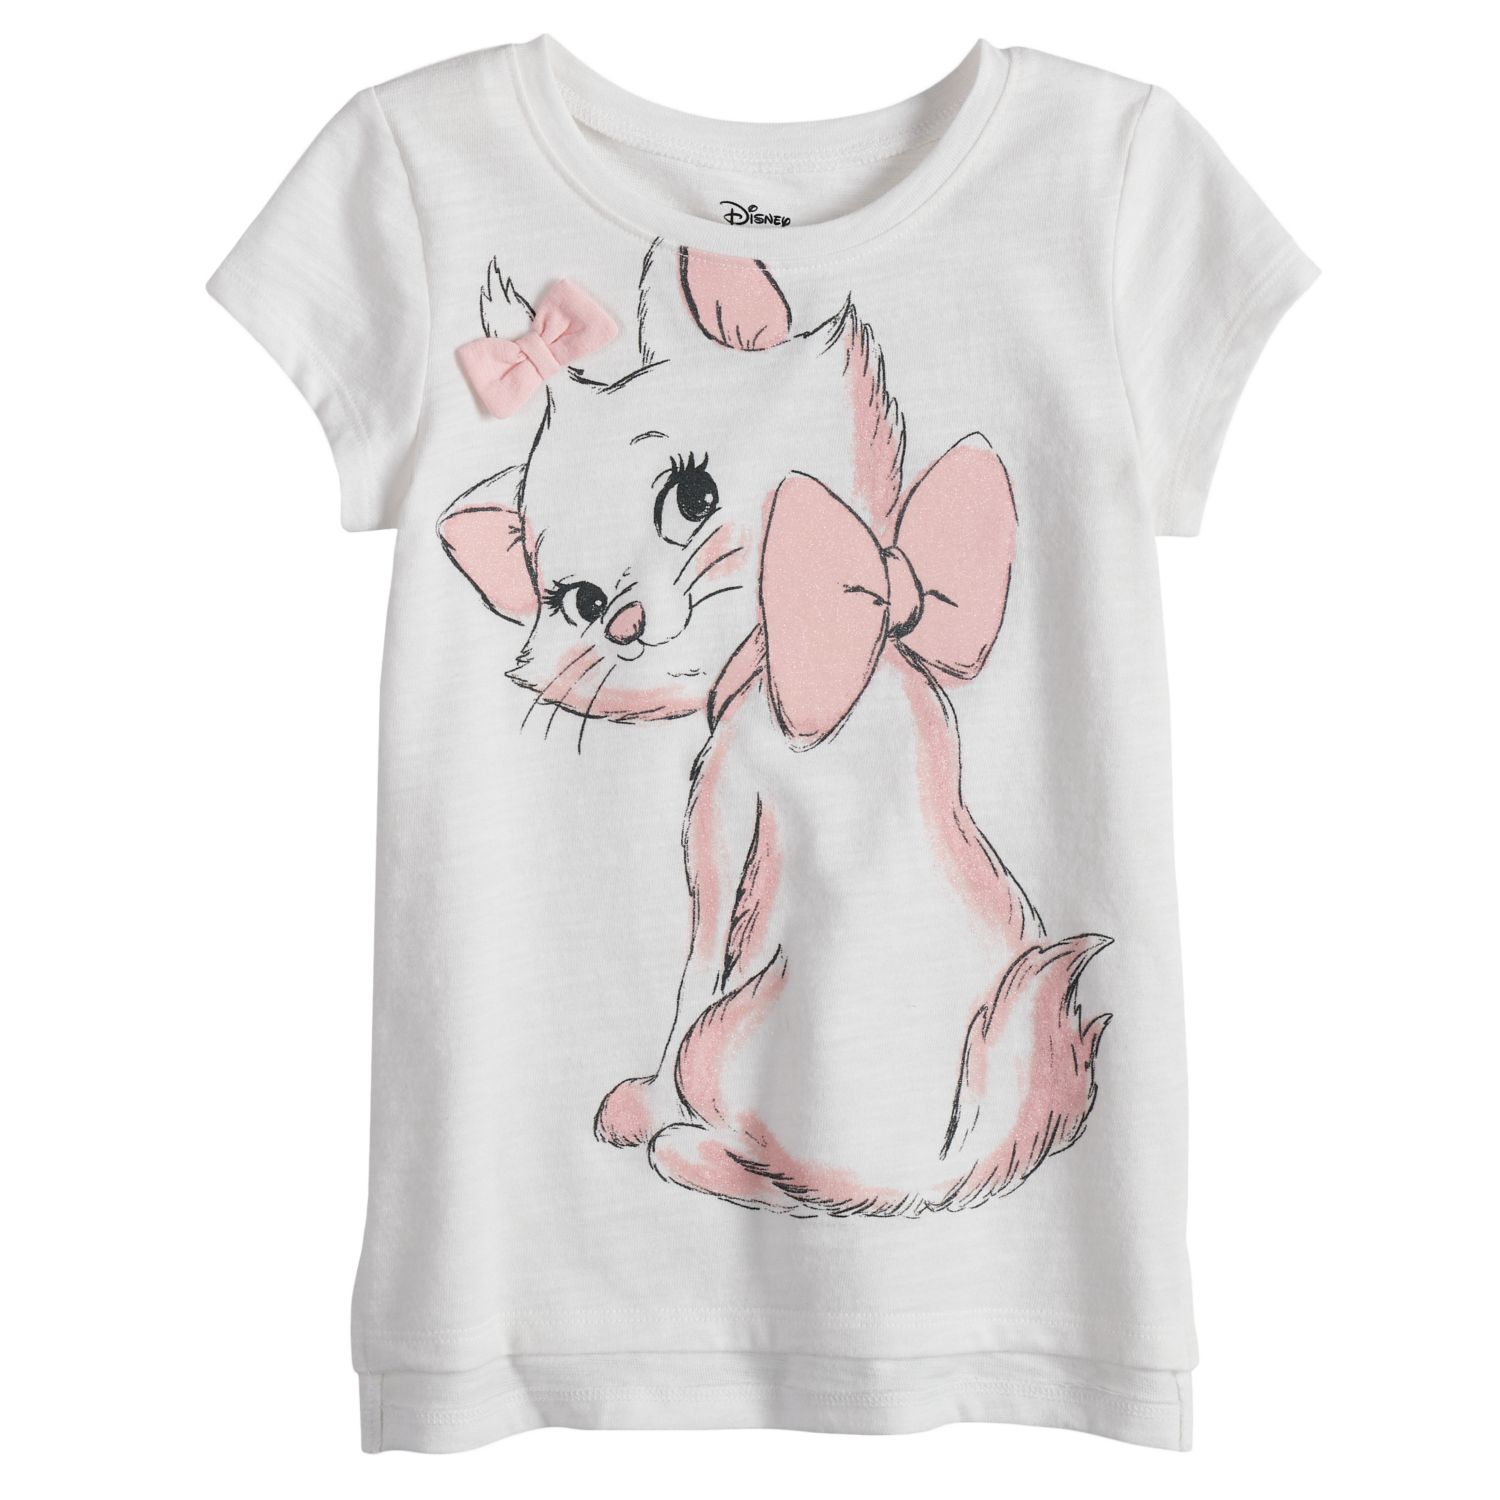 aristocats baby clothes